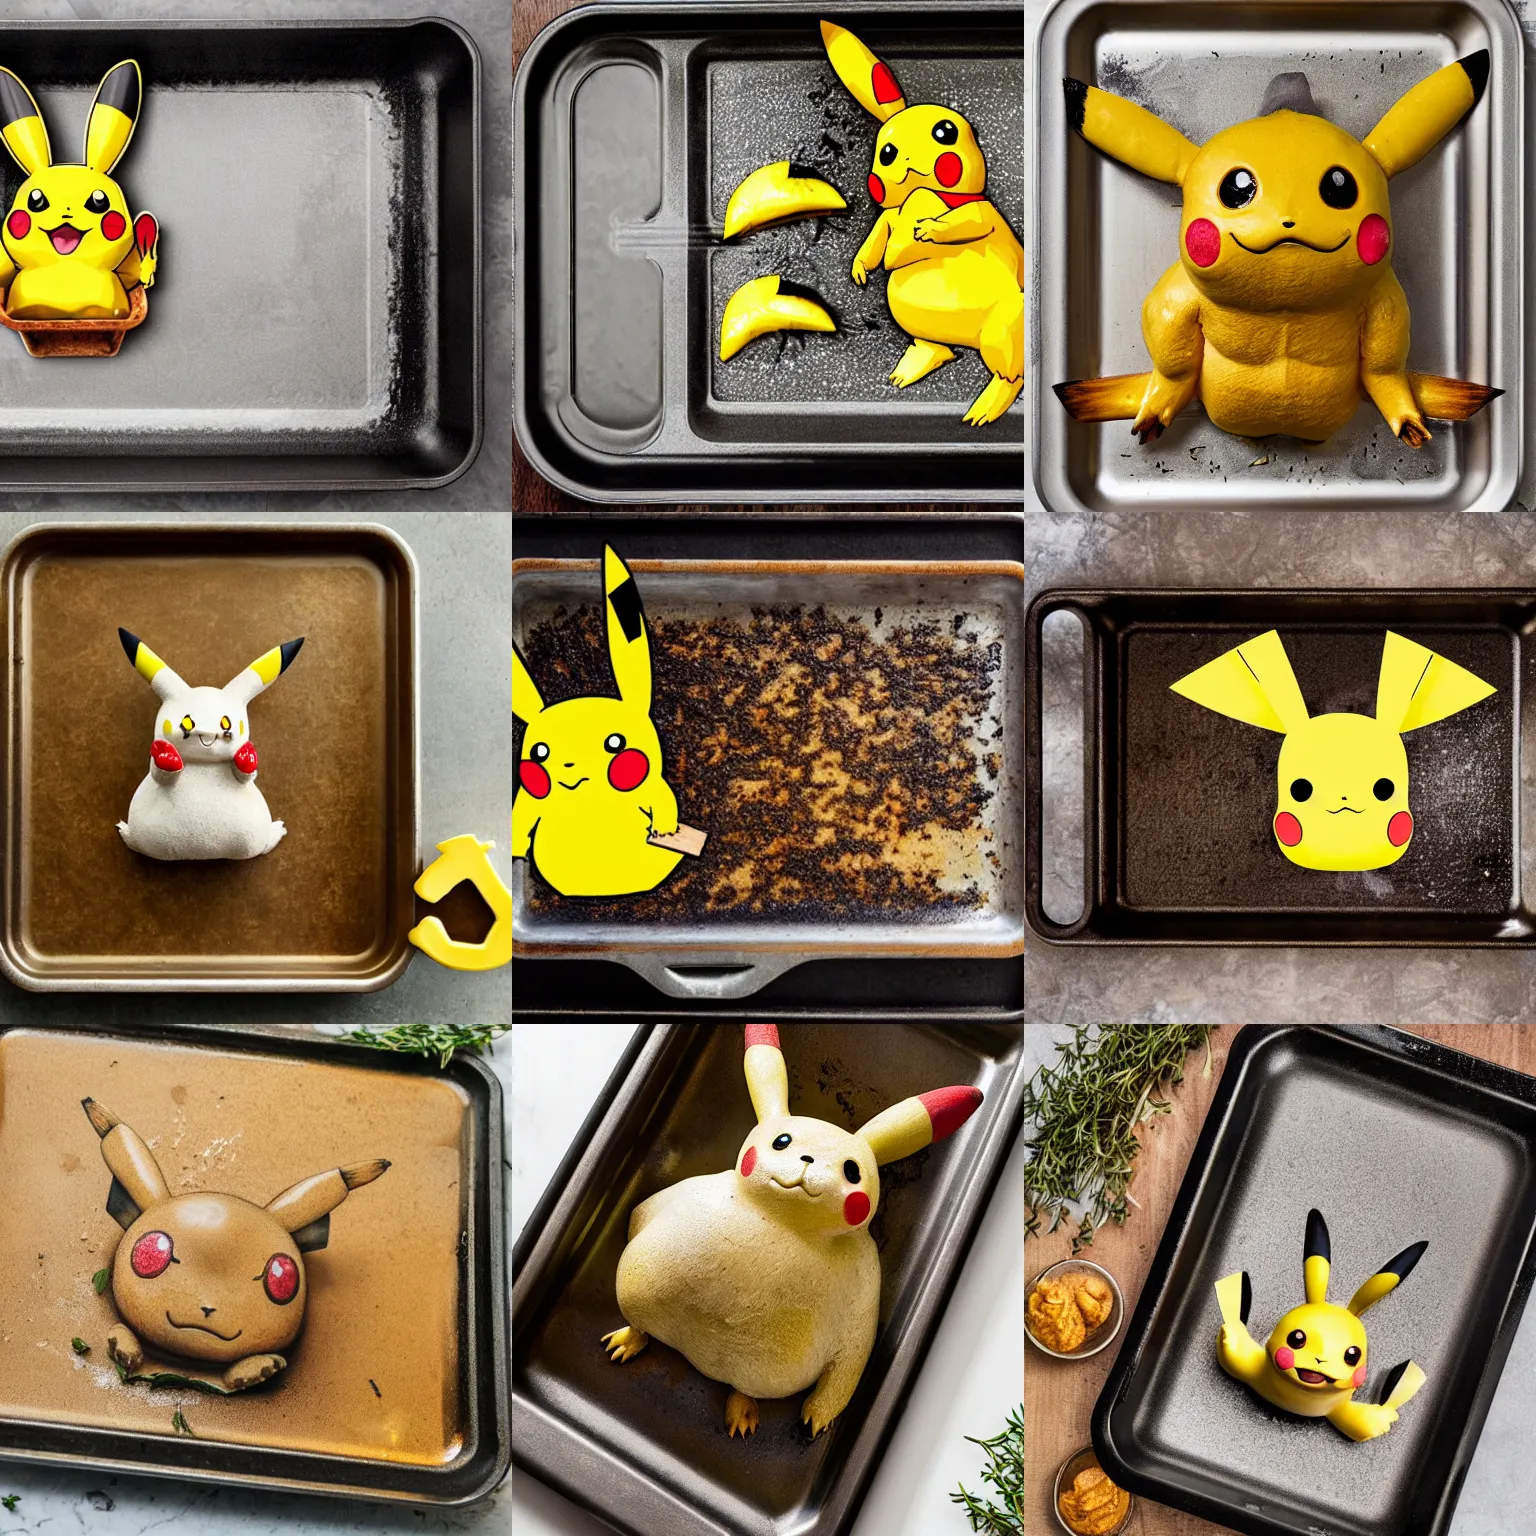 Prompt: roasted pikachu in a baking tray with rosemary and thyme